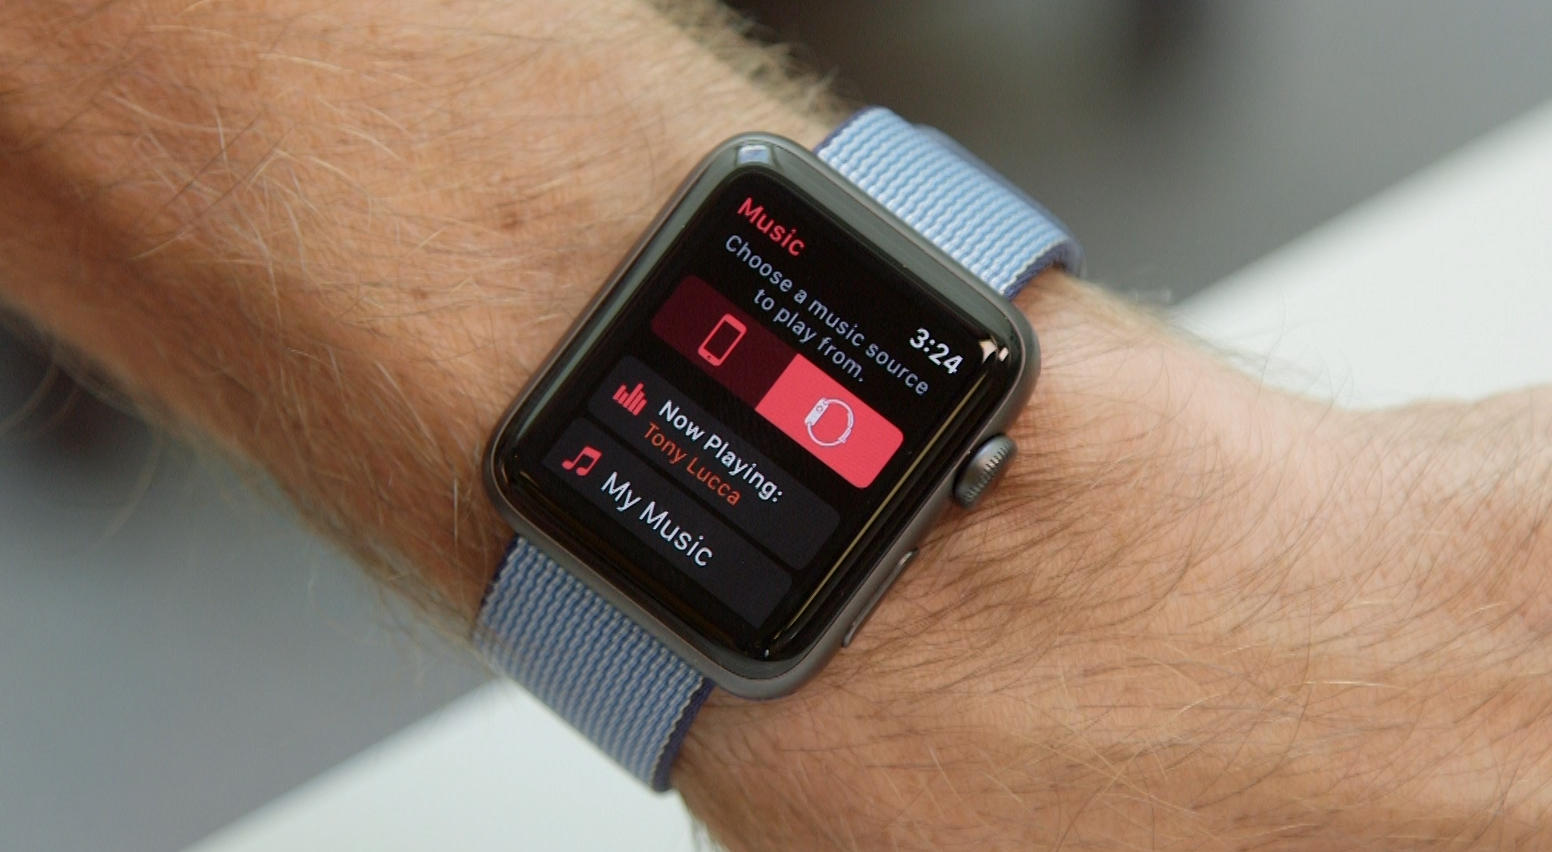 Apple Watch showing music